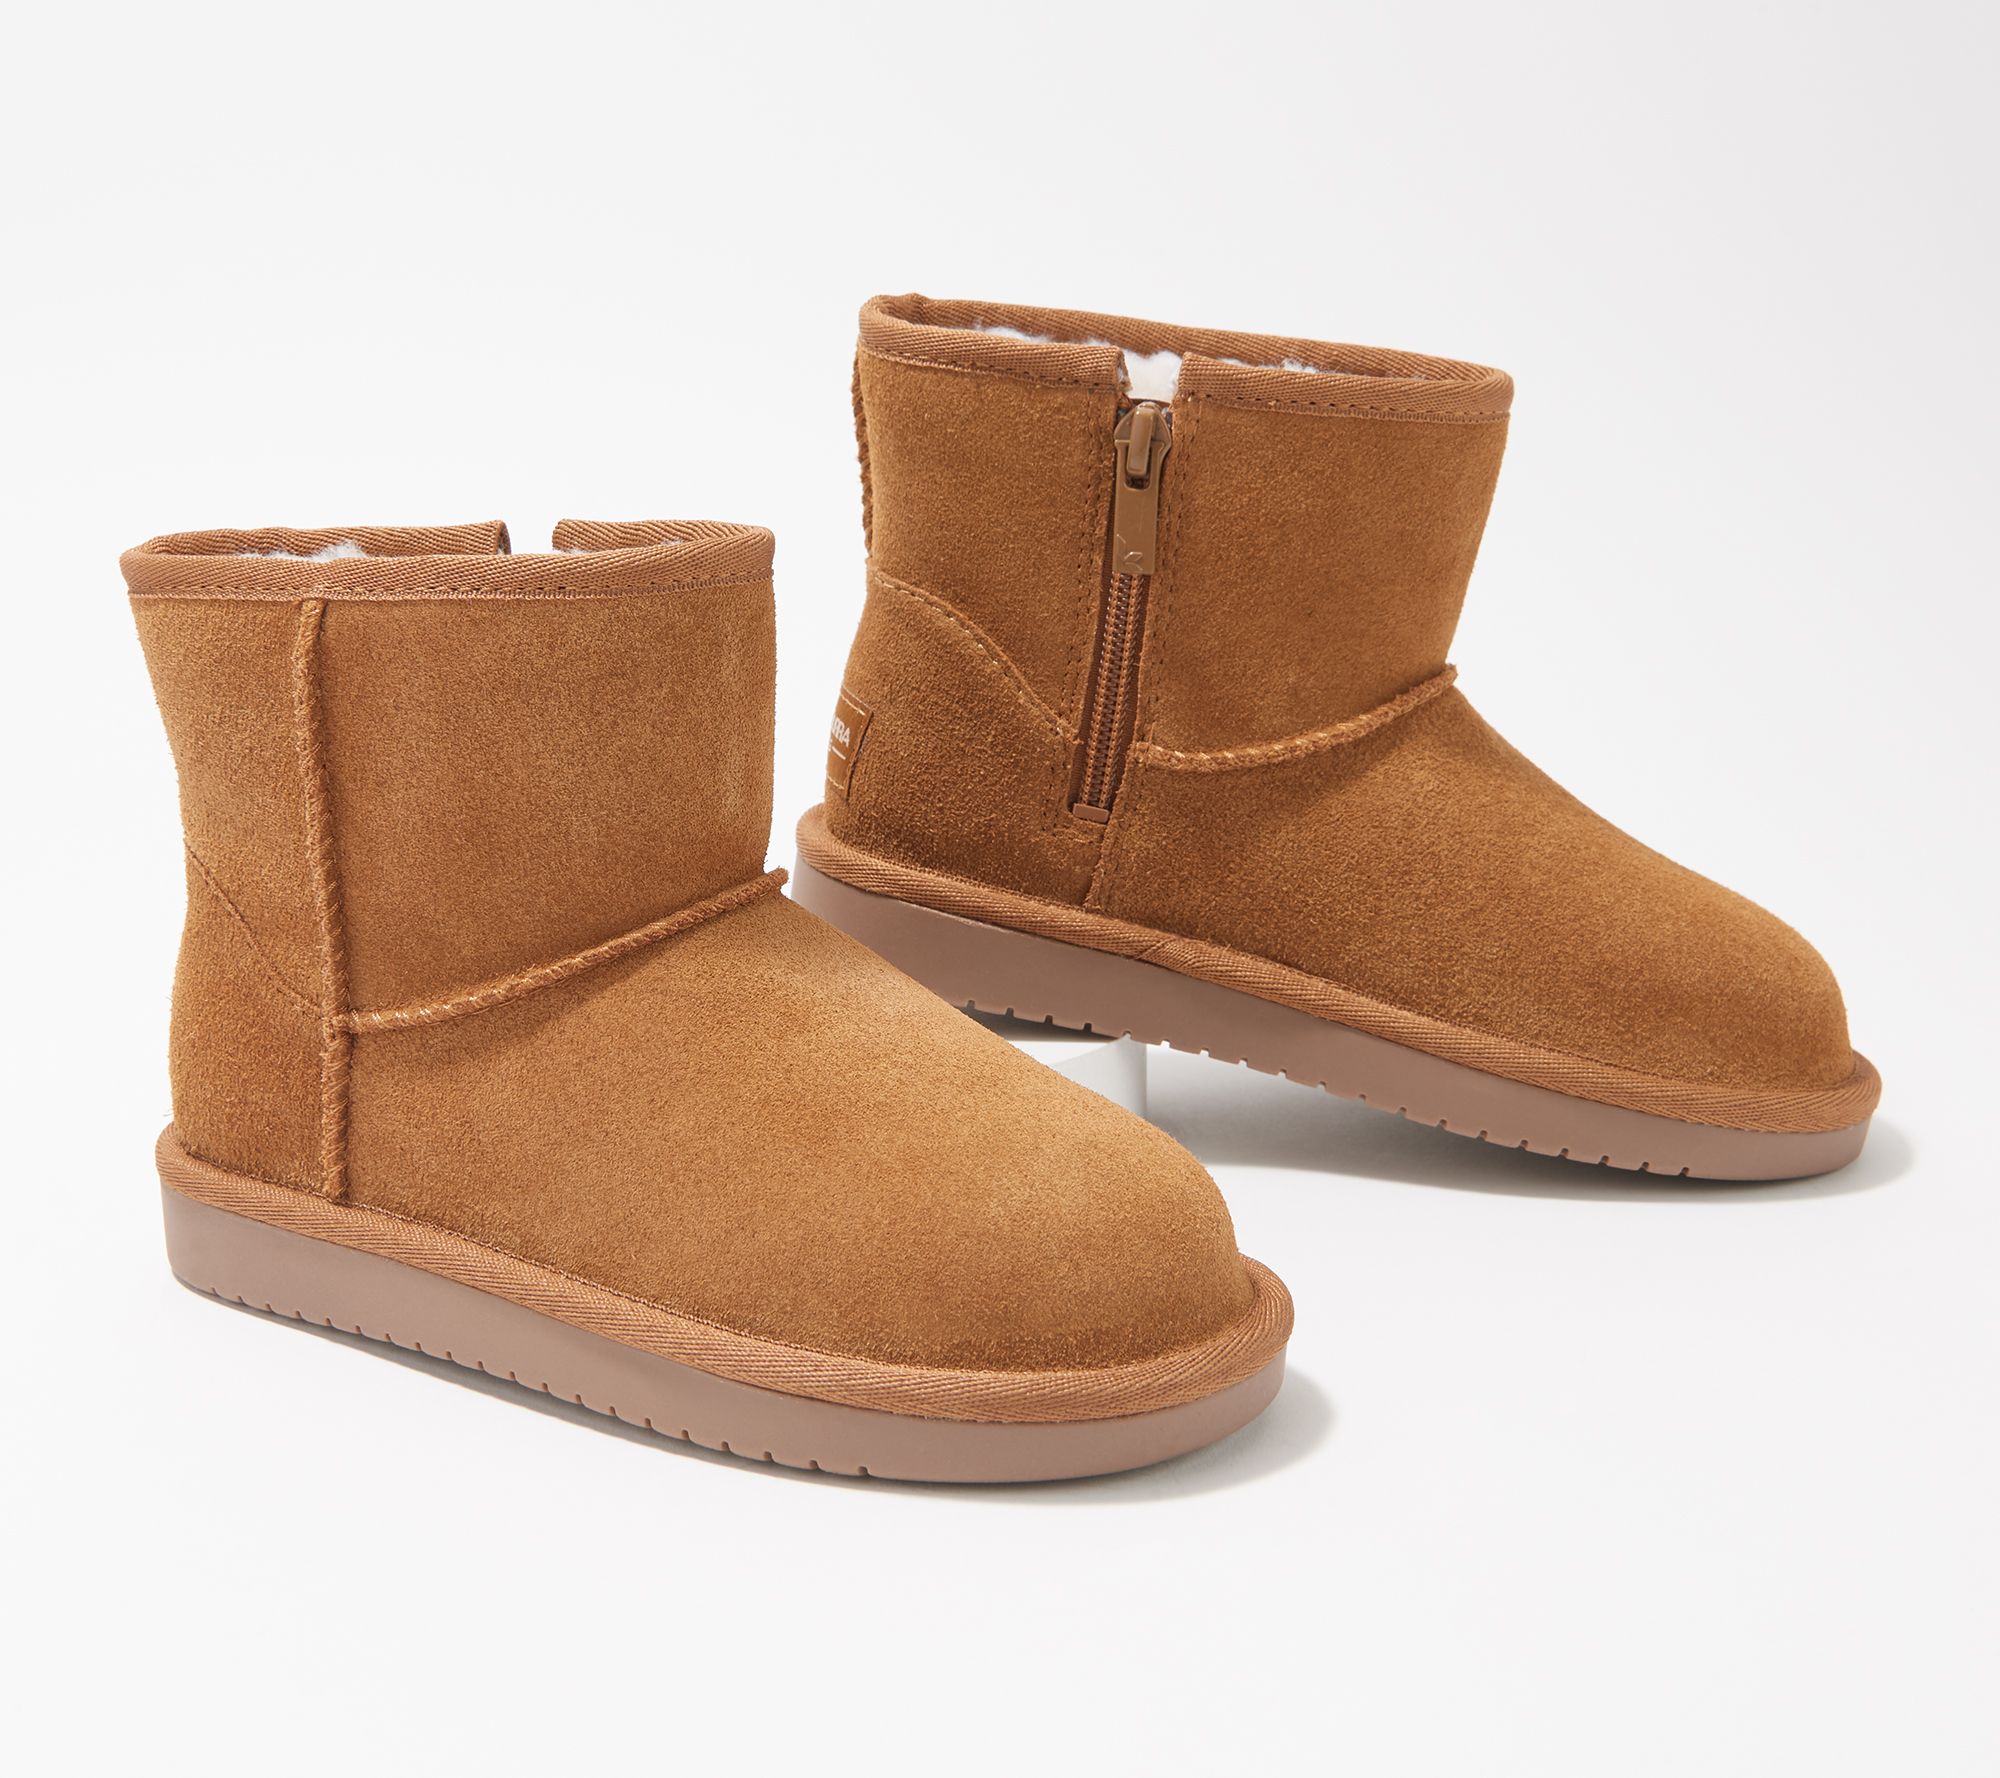 koolaburra by ugg for toddlers